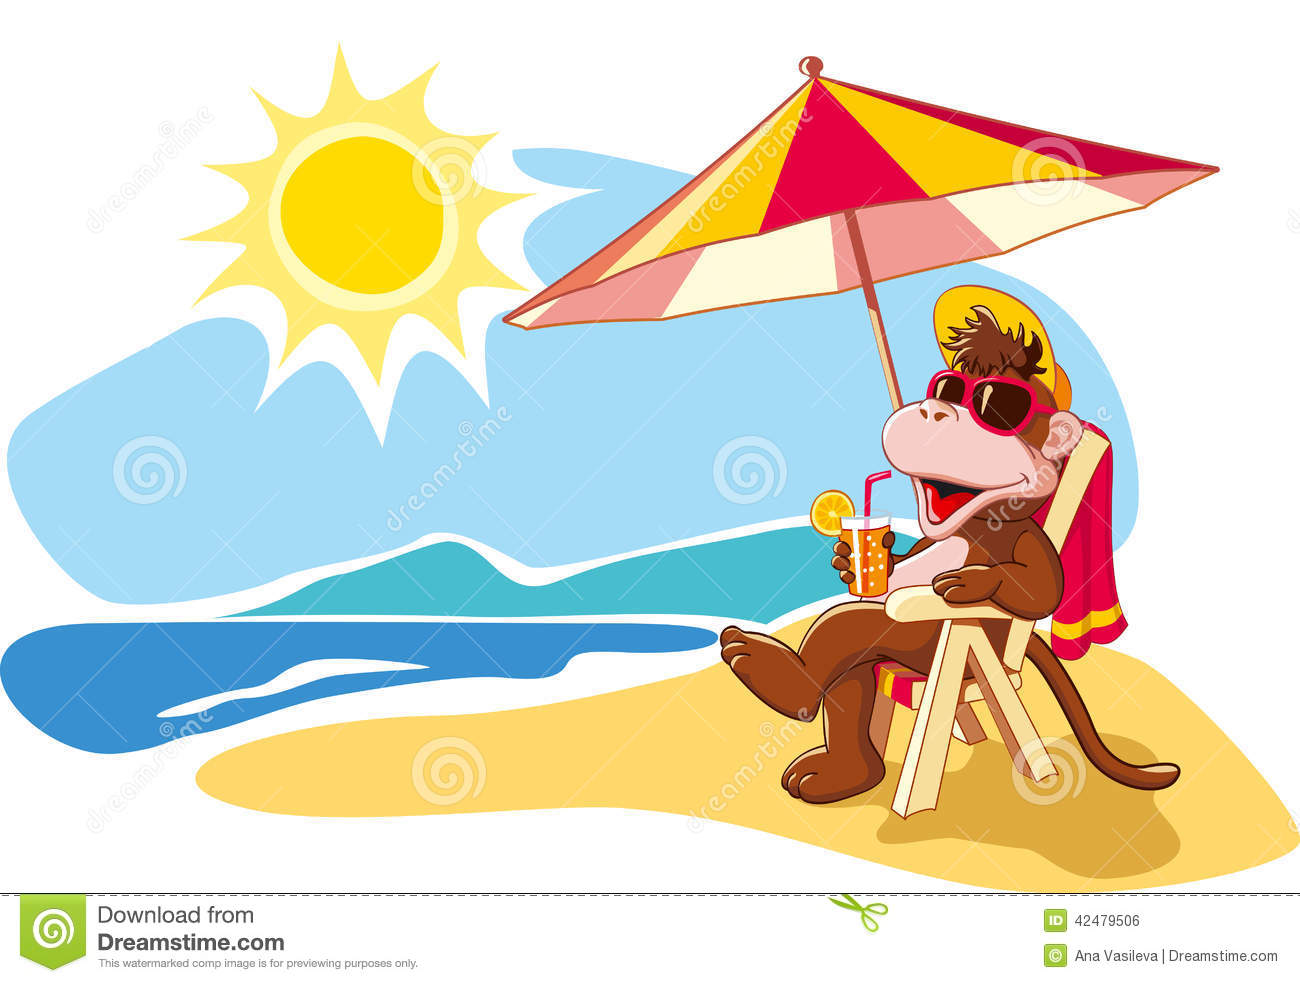 Funny Cartoon Monkey Relaxing On Beach Chair By Sea In Summer Vacation